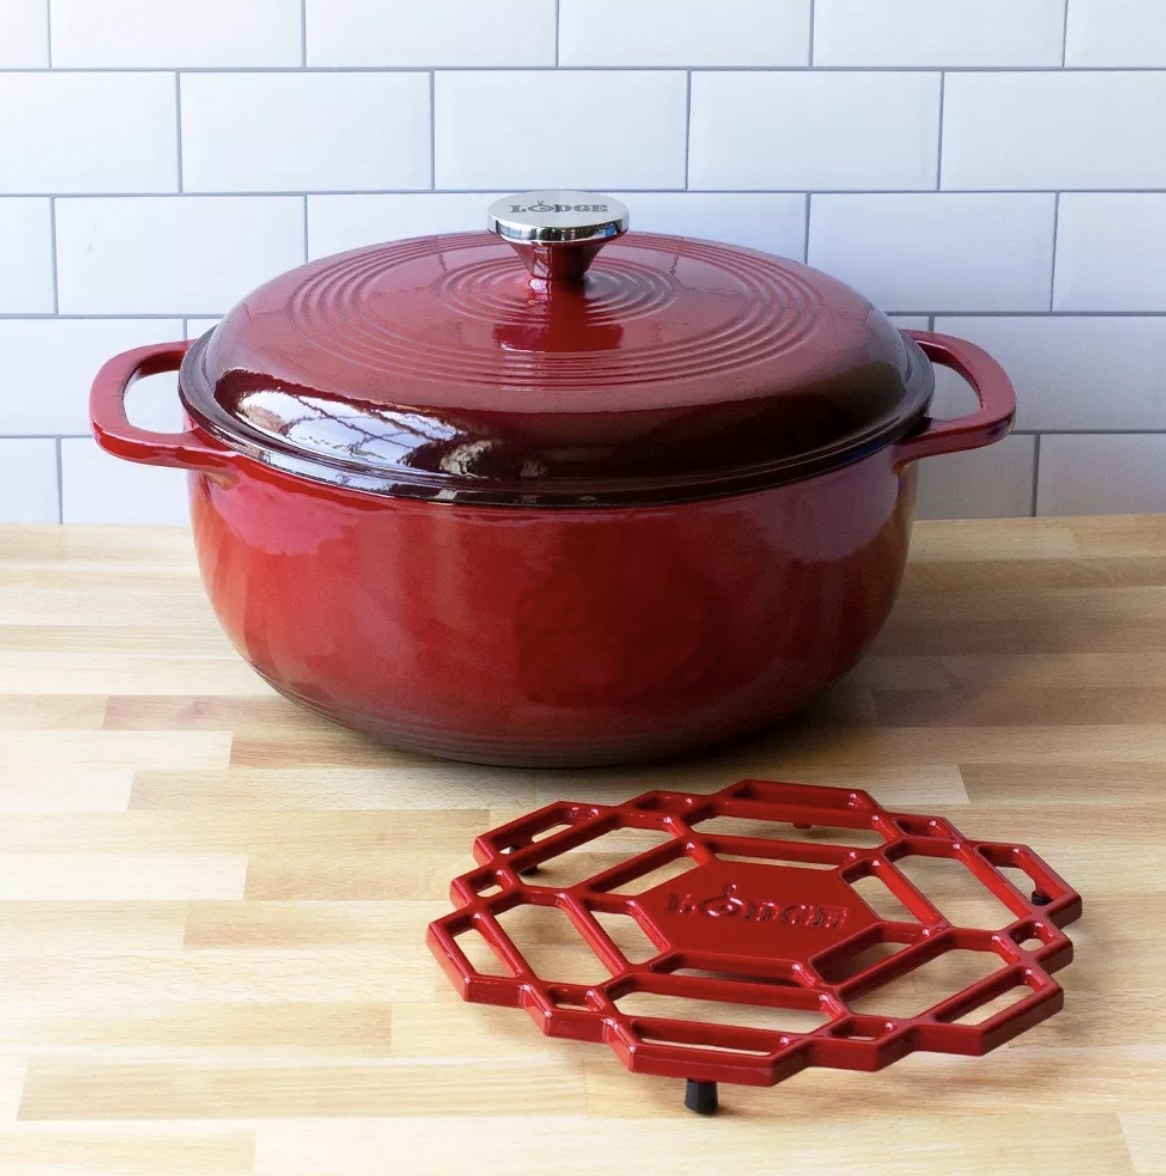 The red cast iron round dish with lid and matching red pot rest next to it